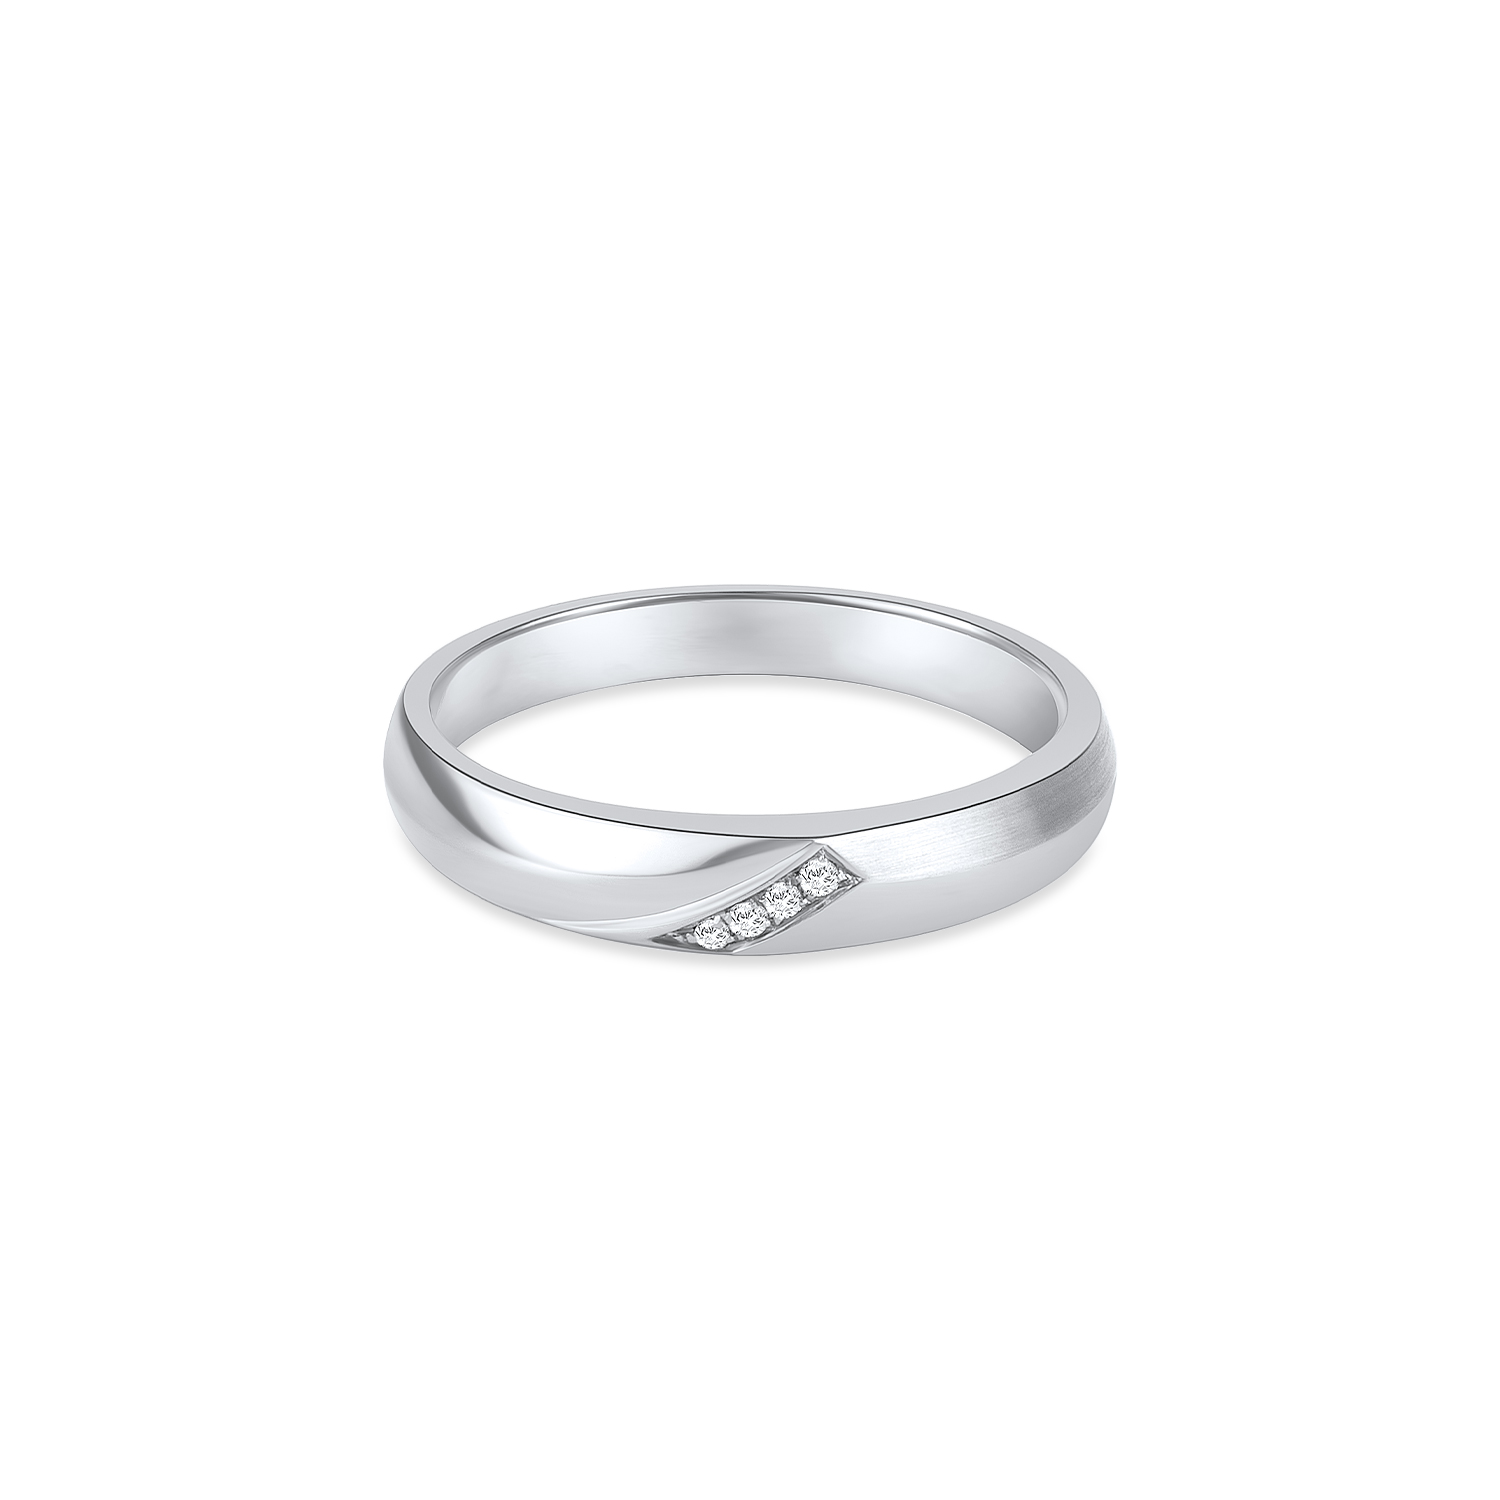 Momento Classic White Gold Wedding Band SK Jewellery